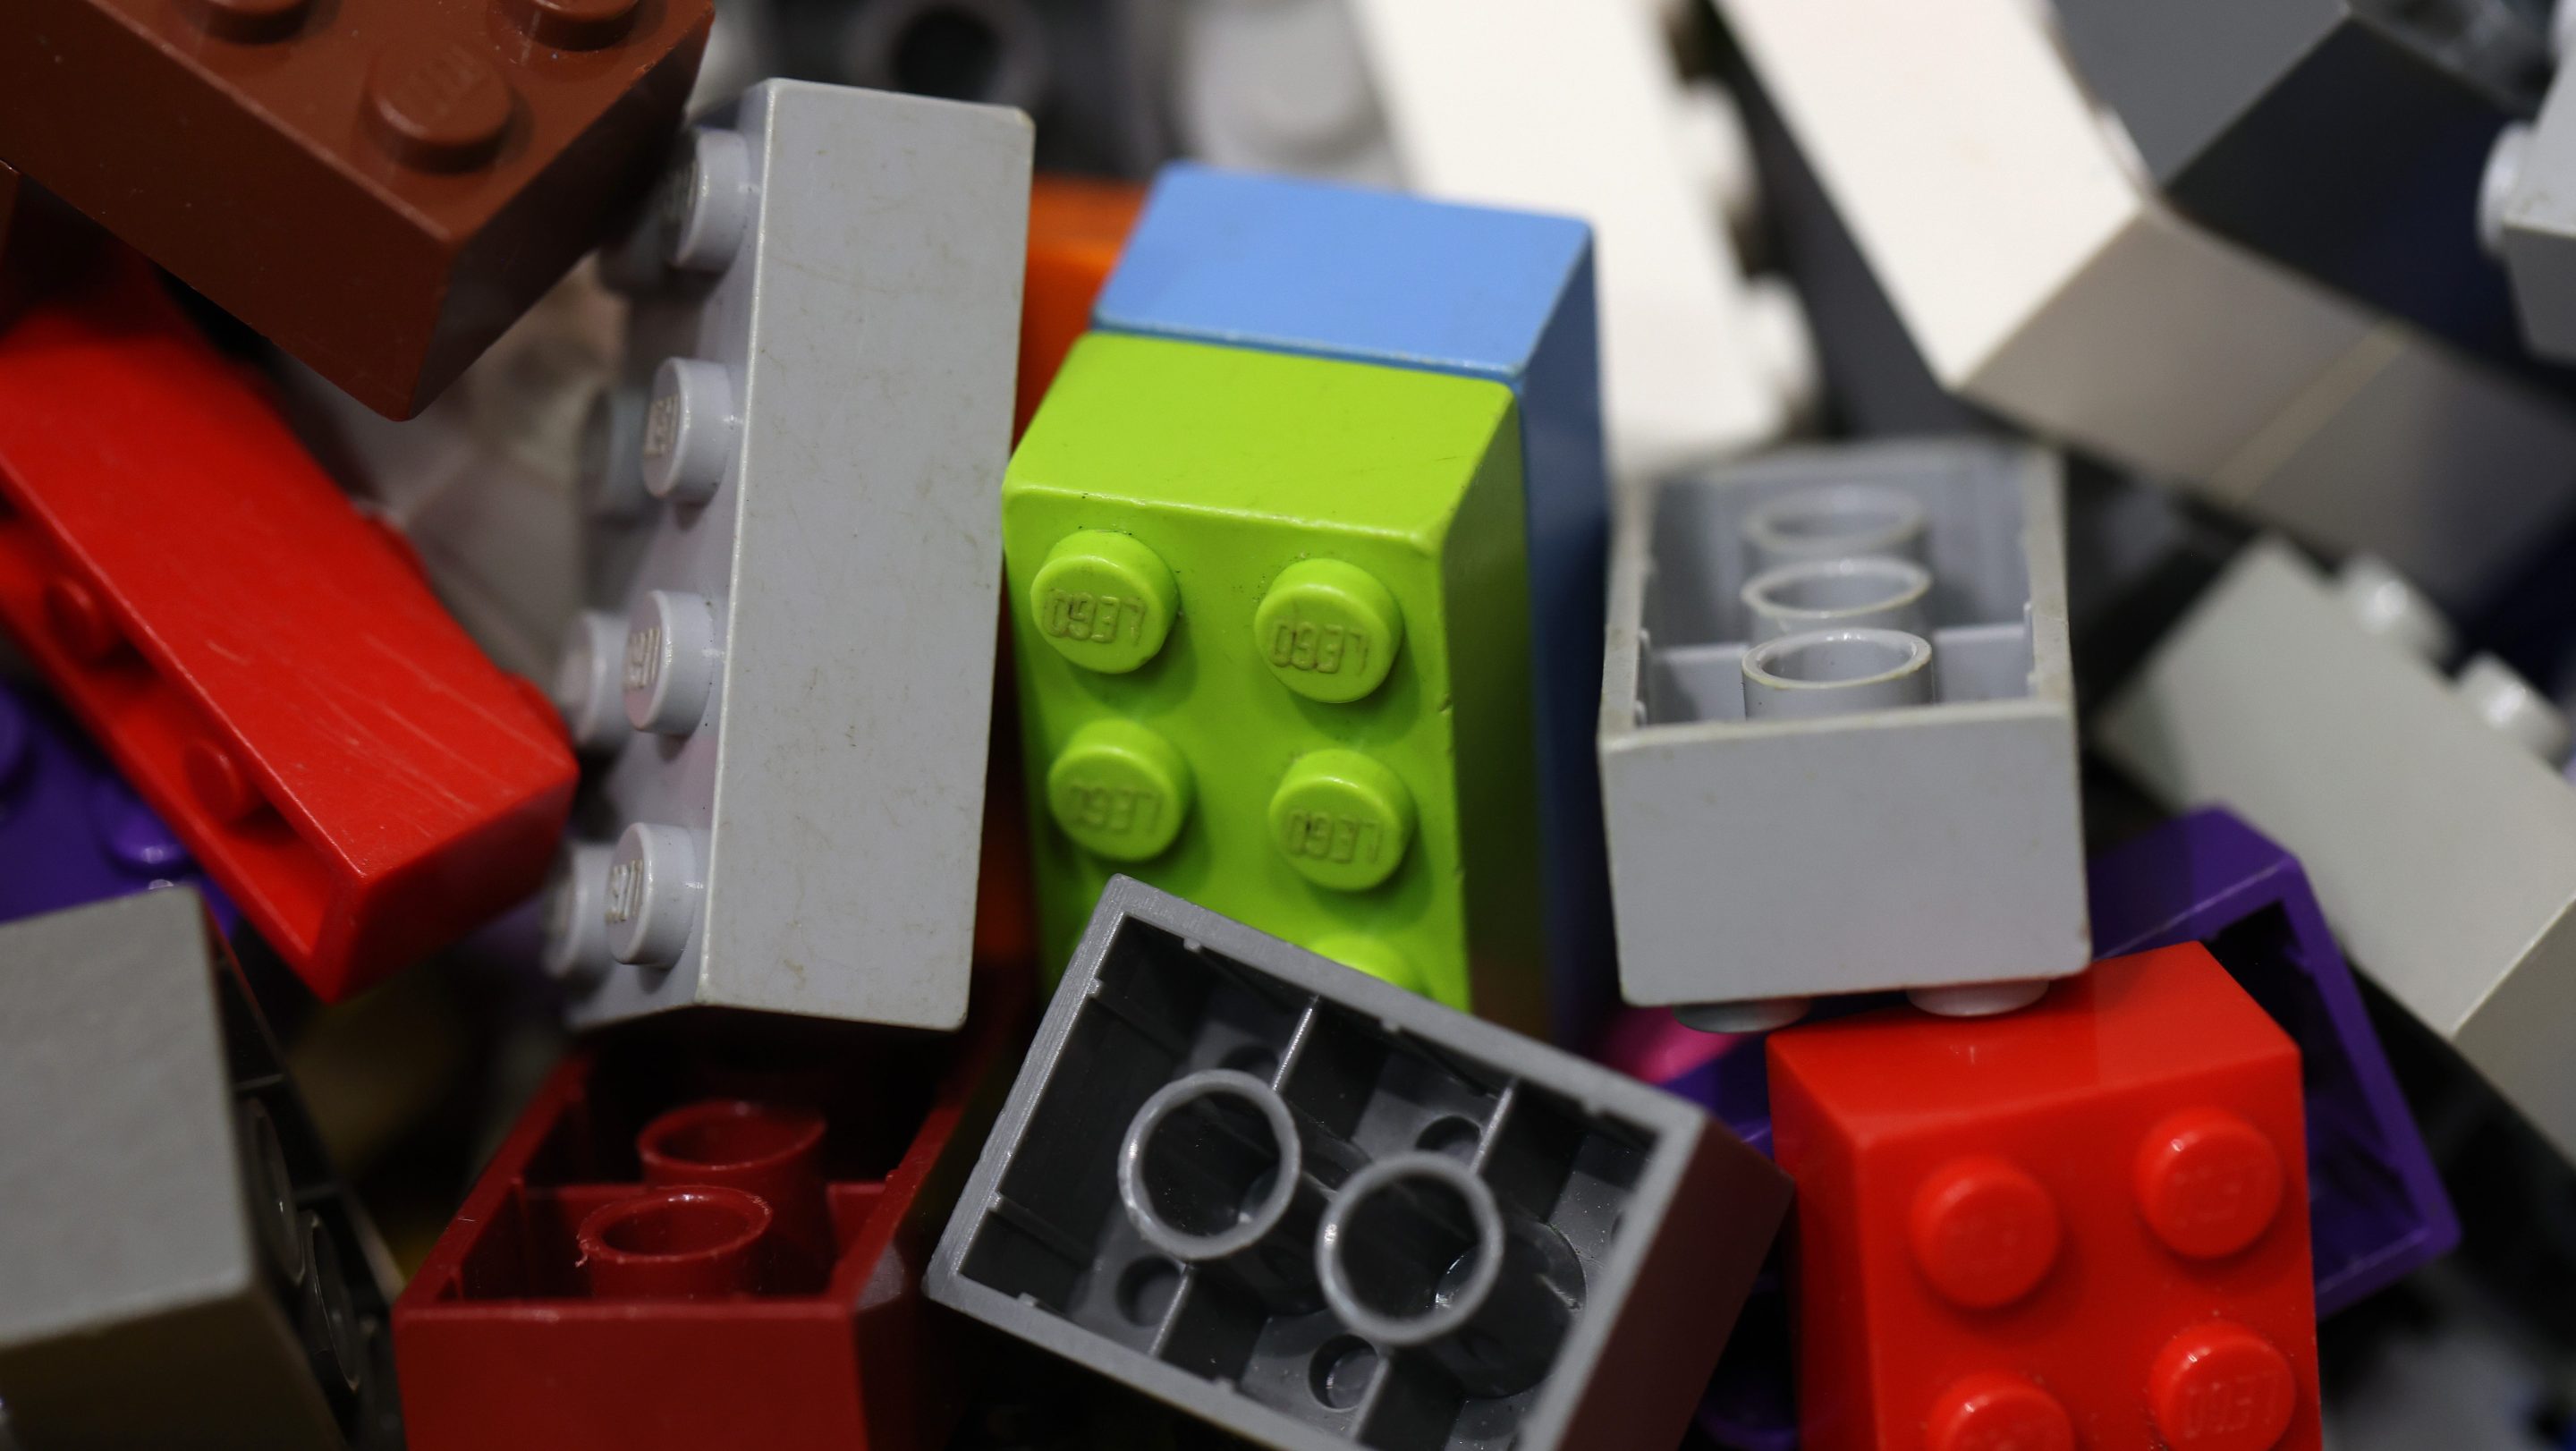 This Place Can be A Little Rough – The LEGO Group Announces LEGO